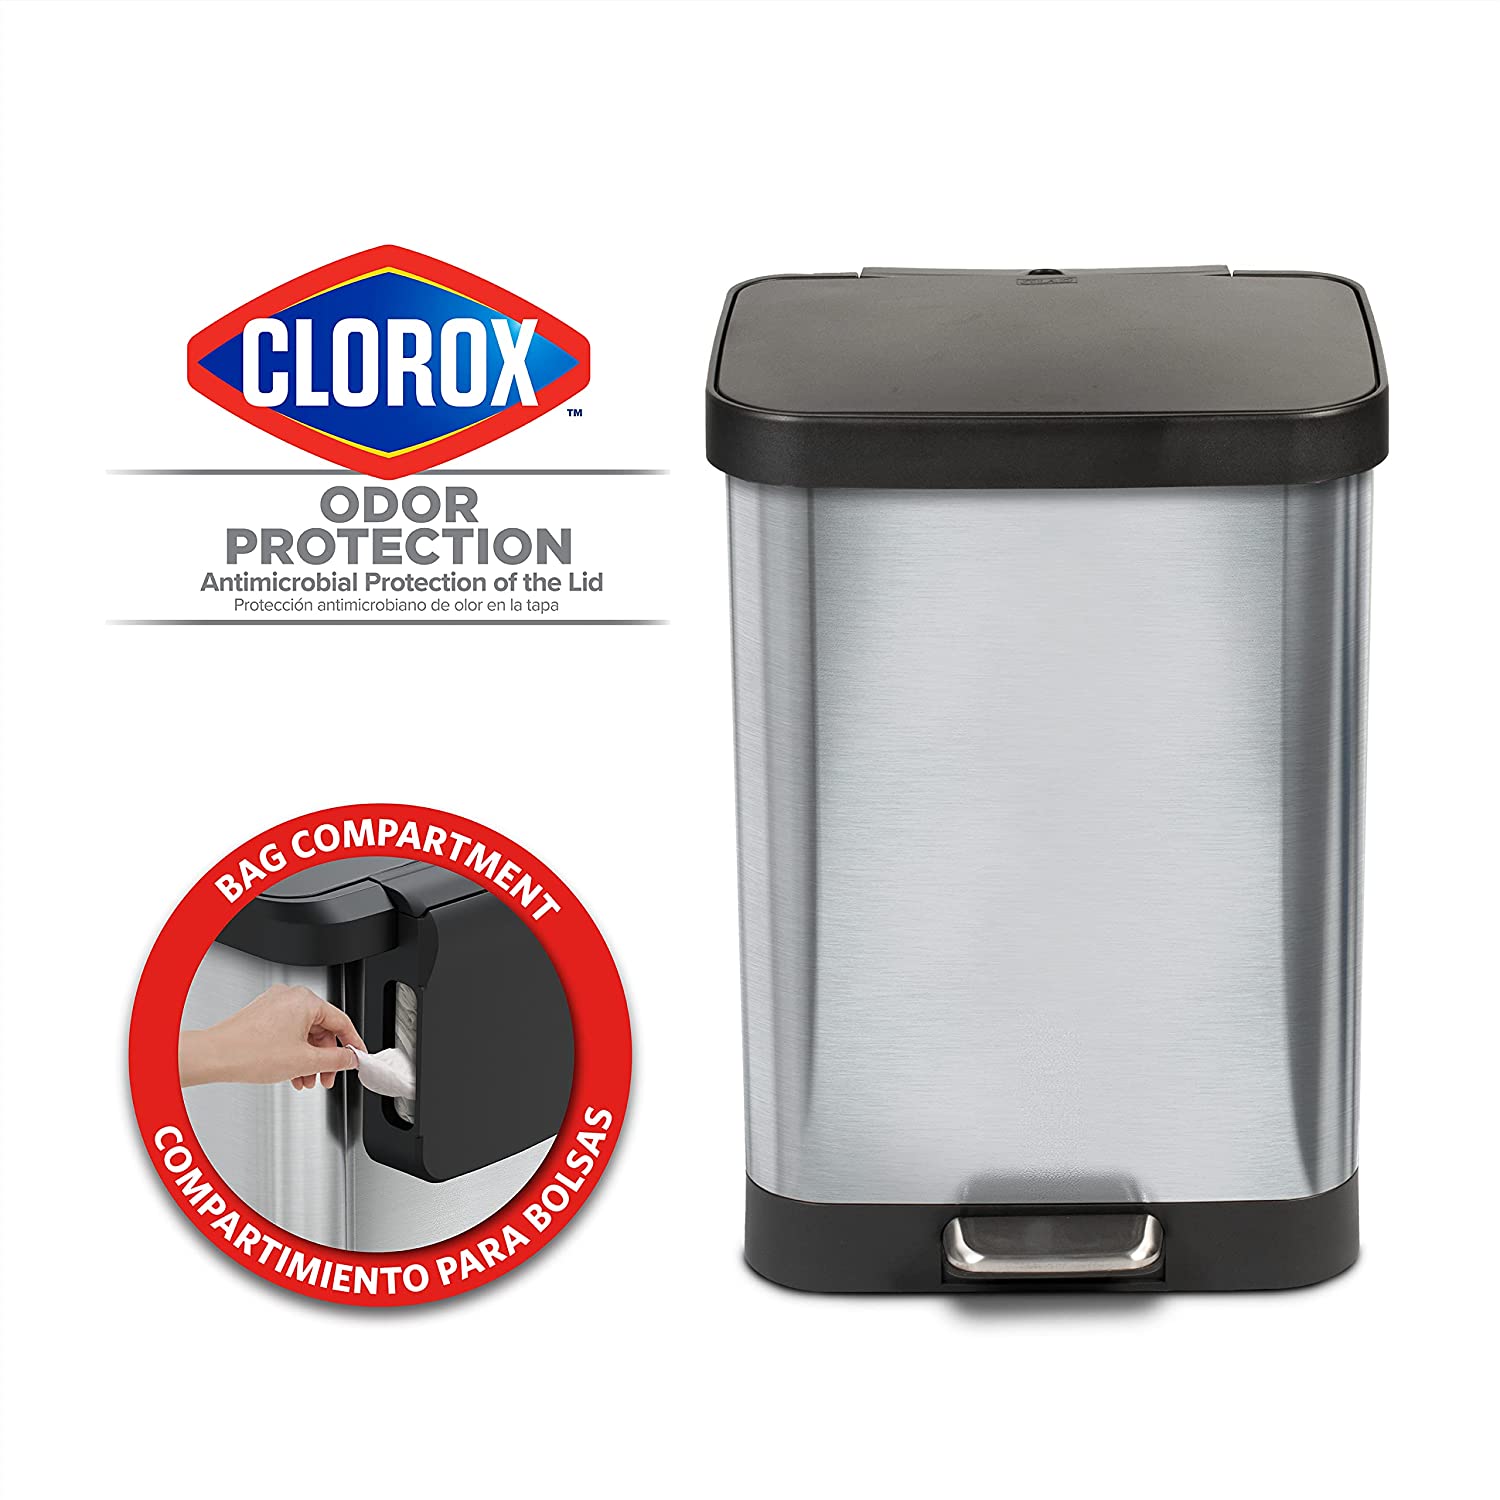 https://bigbigmart.com/wp-content/uploads/2023/05/Glad-GLD-74506-Stainless-Steel-Step-Trash-Can-with-Clorox-Odor-Protection-Large-Metal-Kitchen-Garbage-Bin-with-Soft-Close-Lid-Foot-Pedal-and-Waste-Bag-Roll-Holder-13-Gallon-Stainless2.jpg